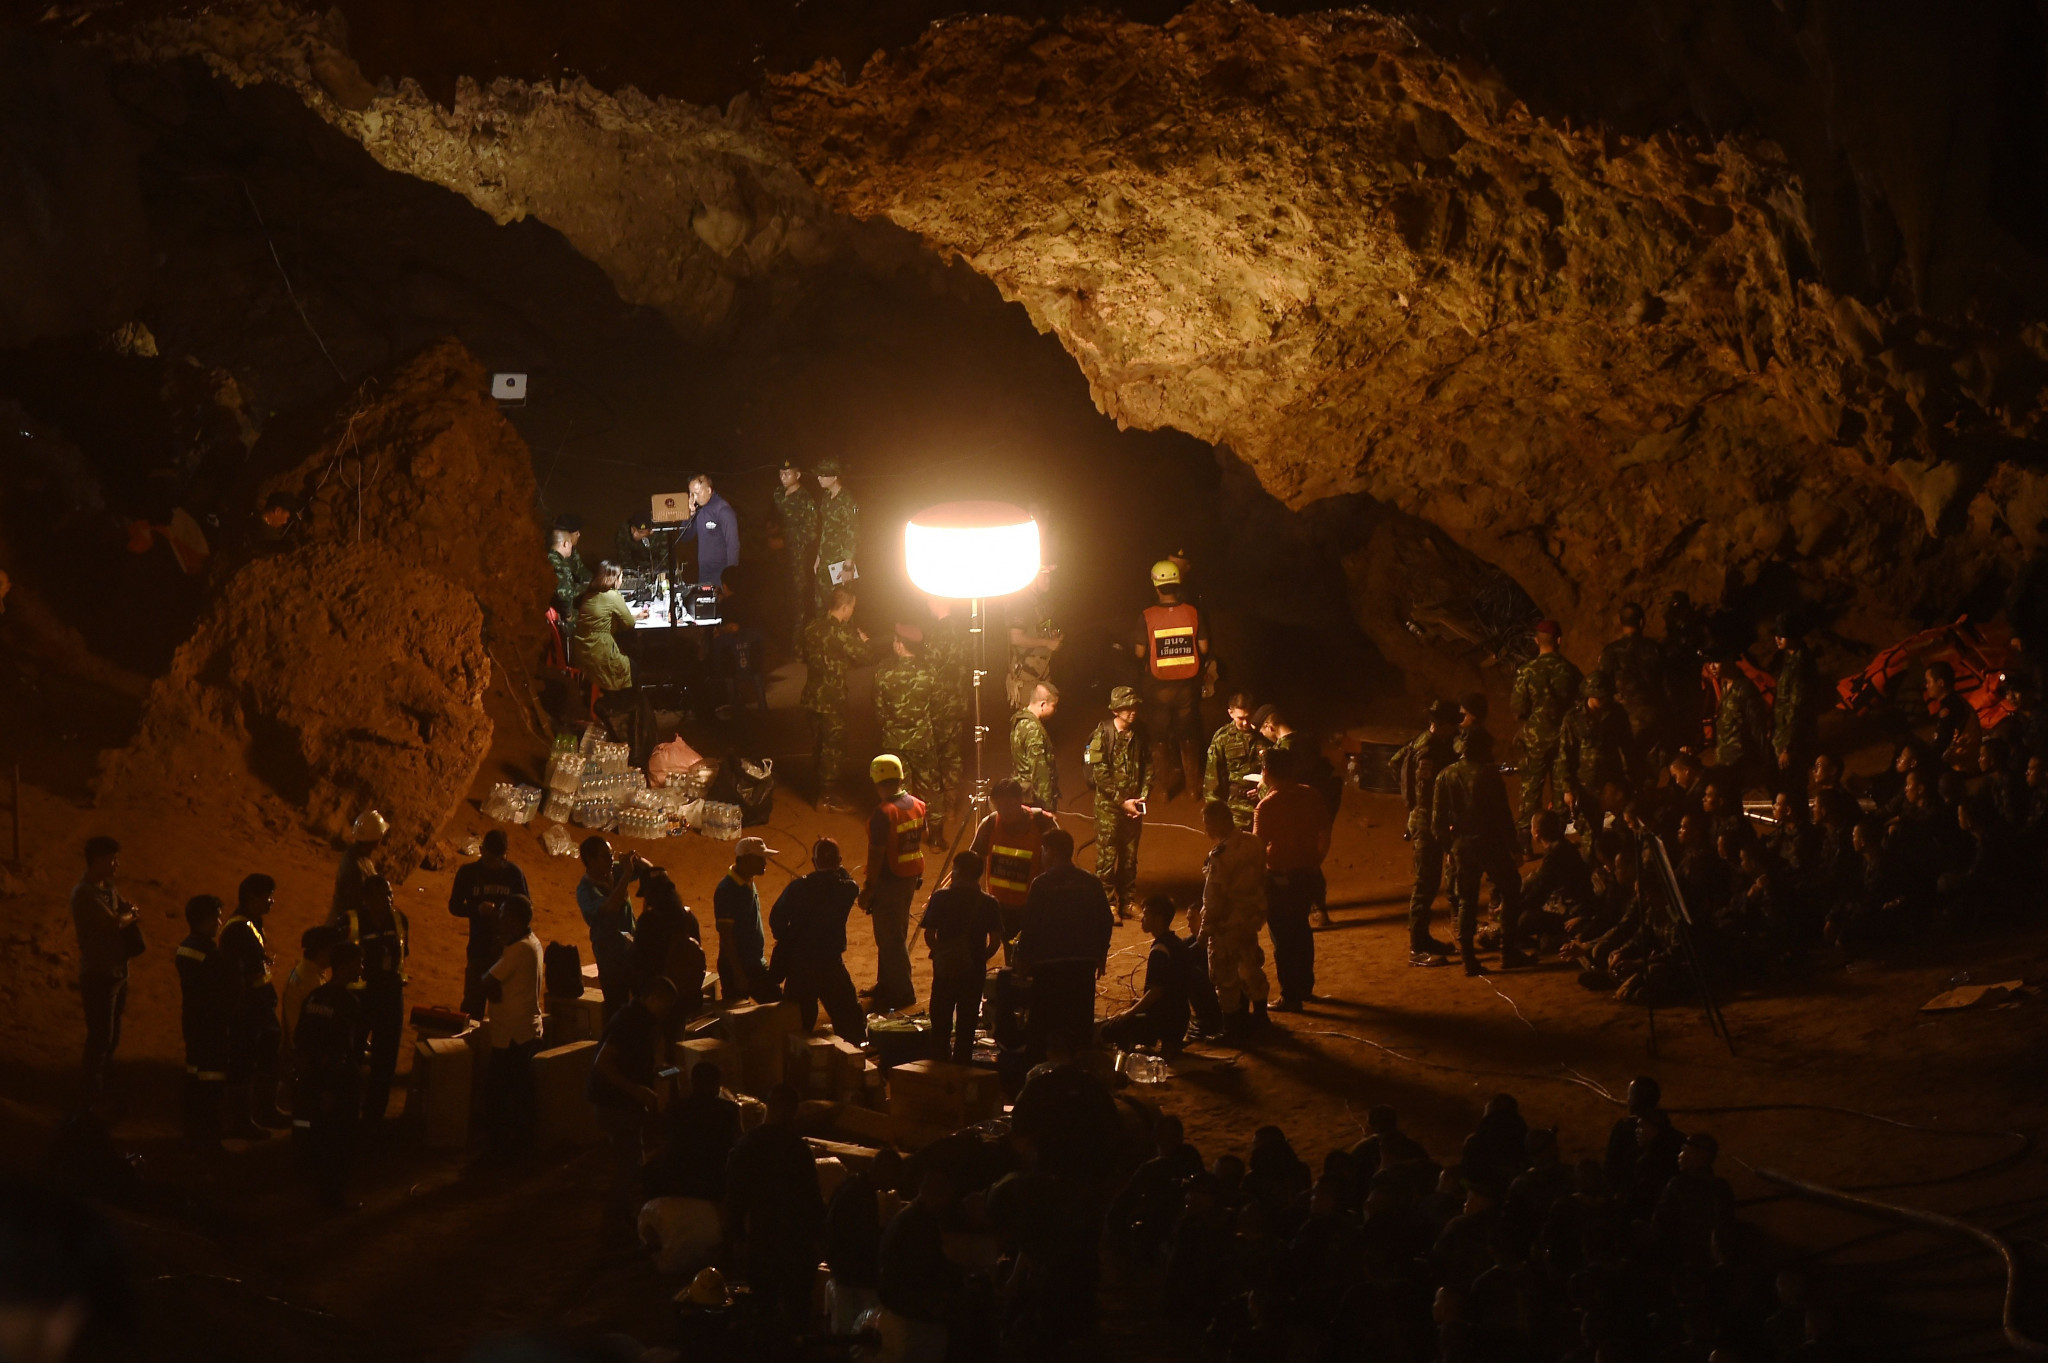 Duangphet Phromthep was one of 13 people rescued from the Tham Luang Nang Non cave in 2018 ©Getty Images